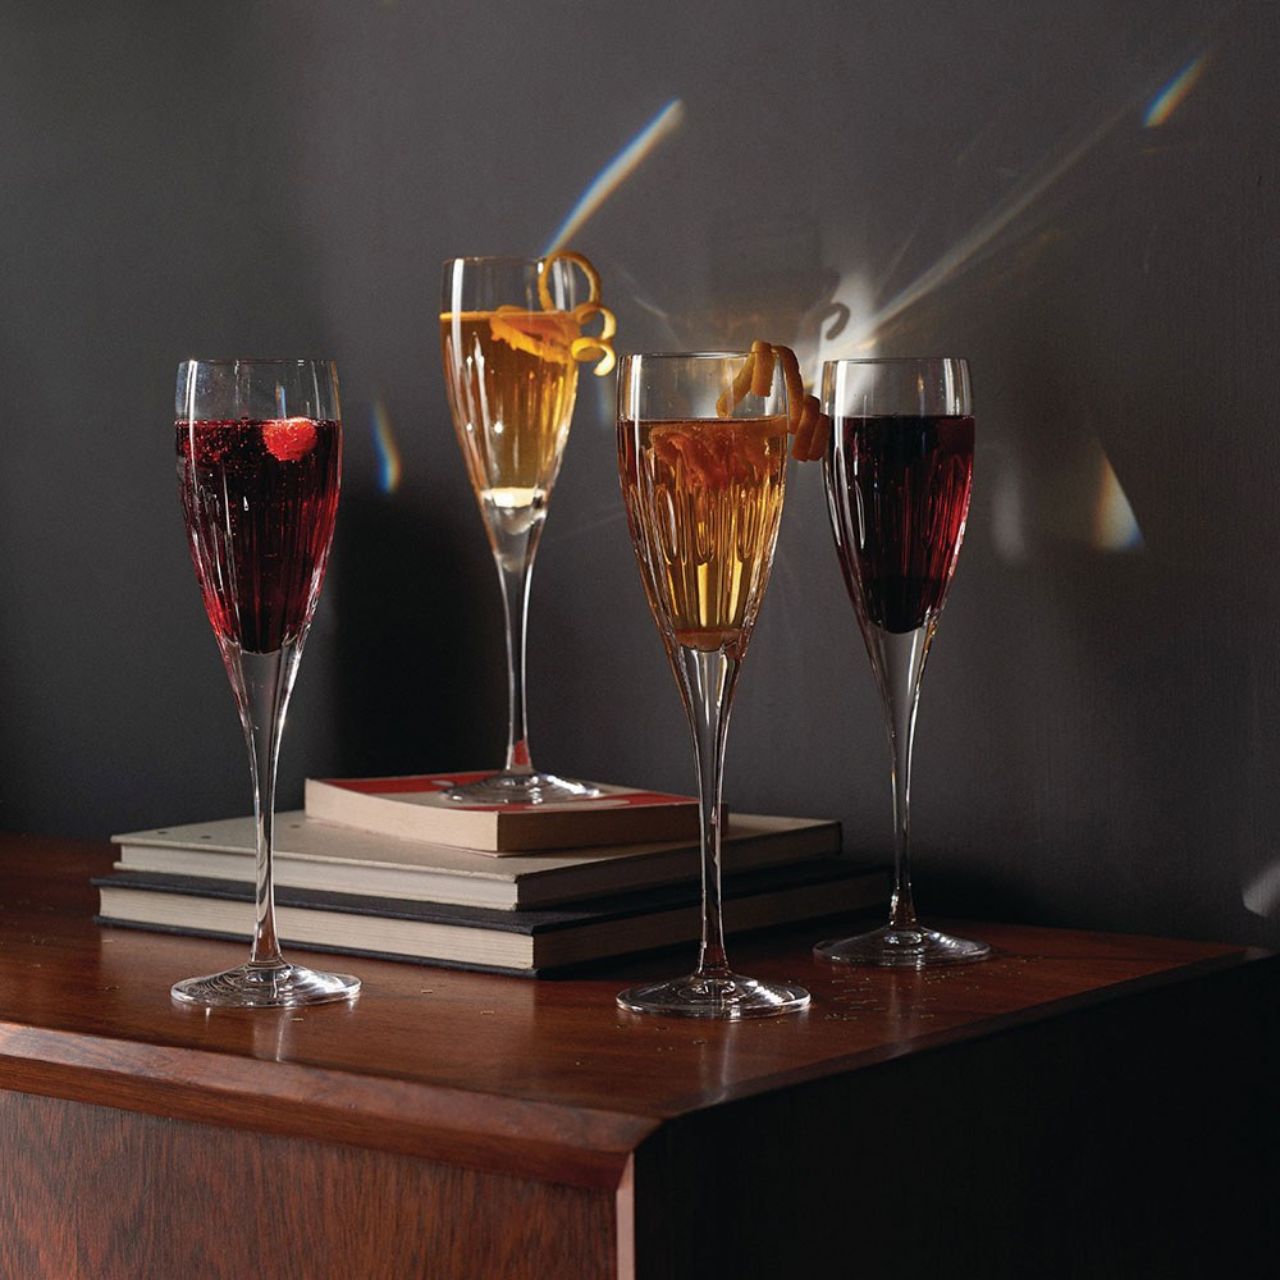 Waterford Crystal Mara Champagne Flute Set of 6  Celebrating the beauty of simplicity, Mara, the Irish meaning for sea, is inspired by the wild Atlantic Ocean. Showcasing both long and short deep vertical cuts, Mara's modern design with elegant simplicity is now available as a set of six. 